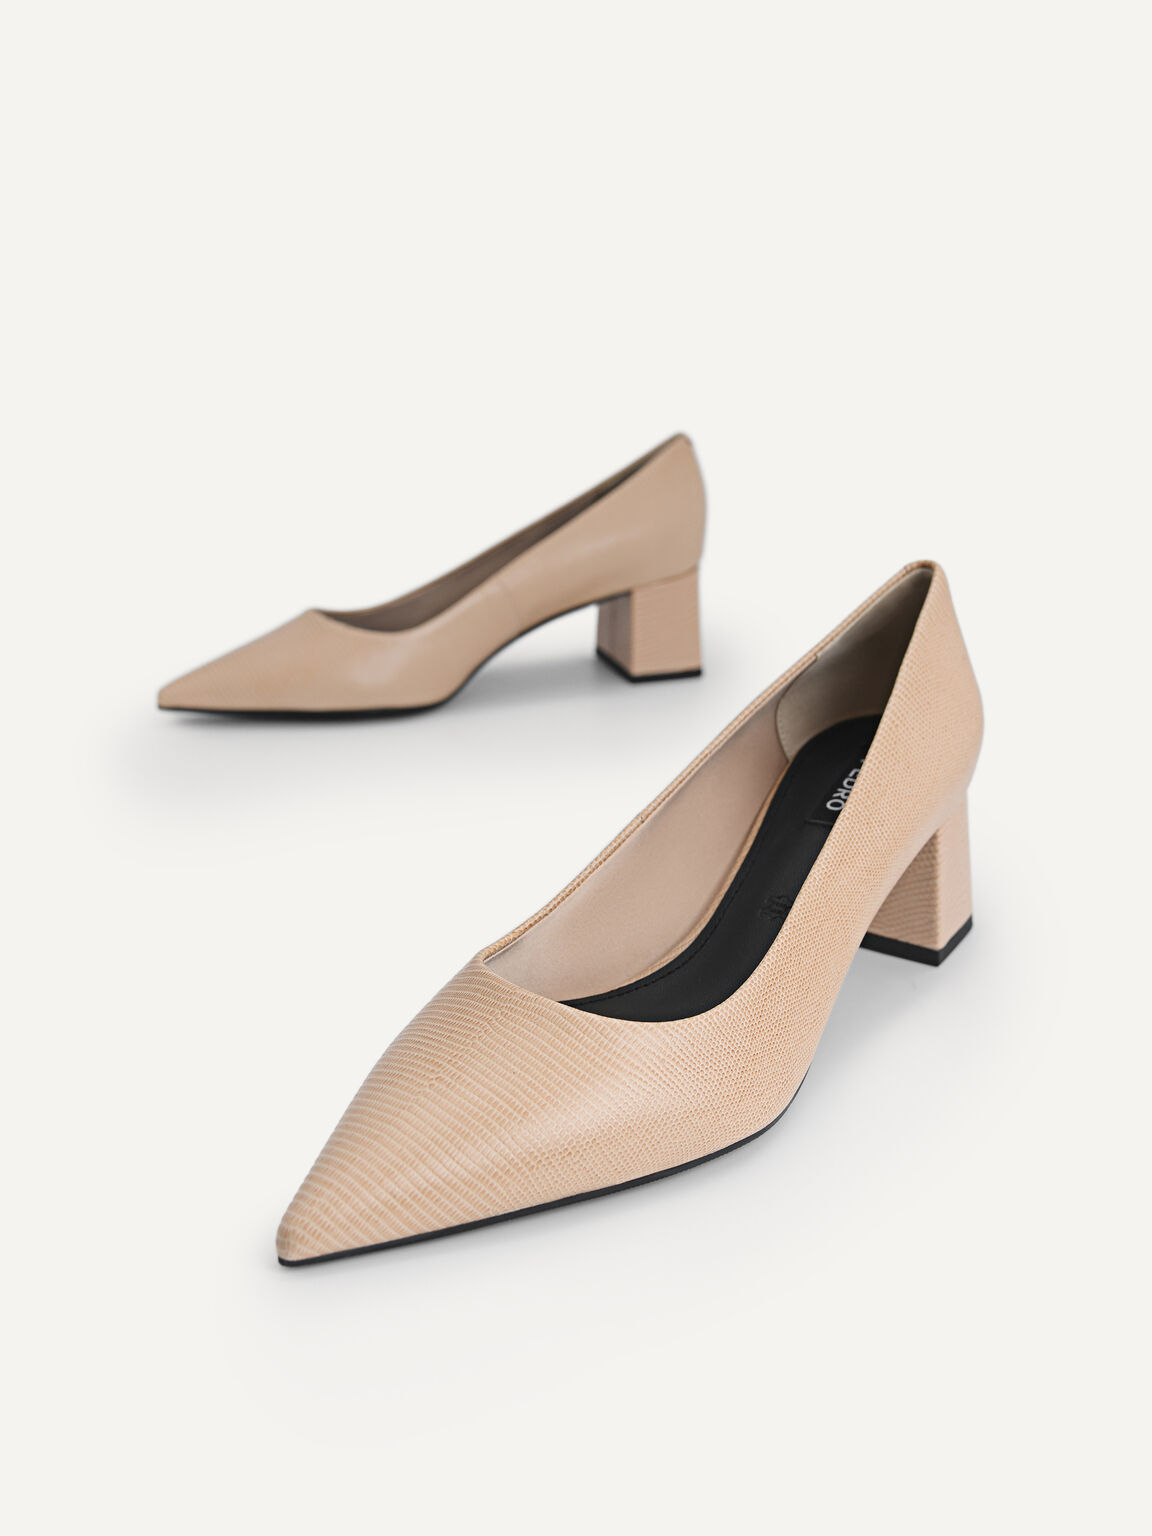 Lizard-Effect Leather Pointed Toe Pumps, Nude